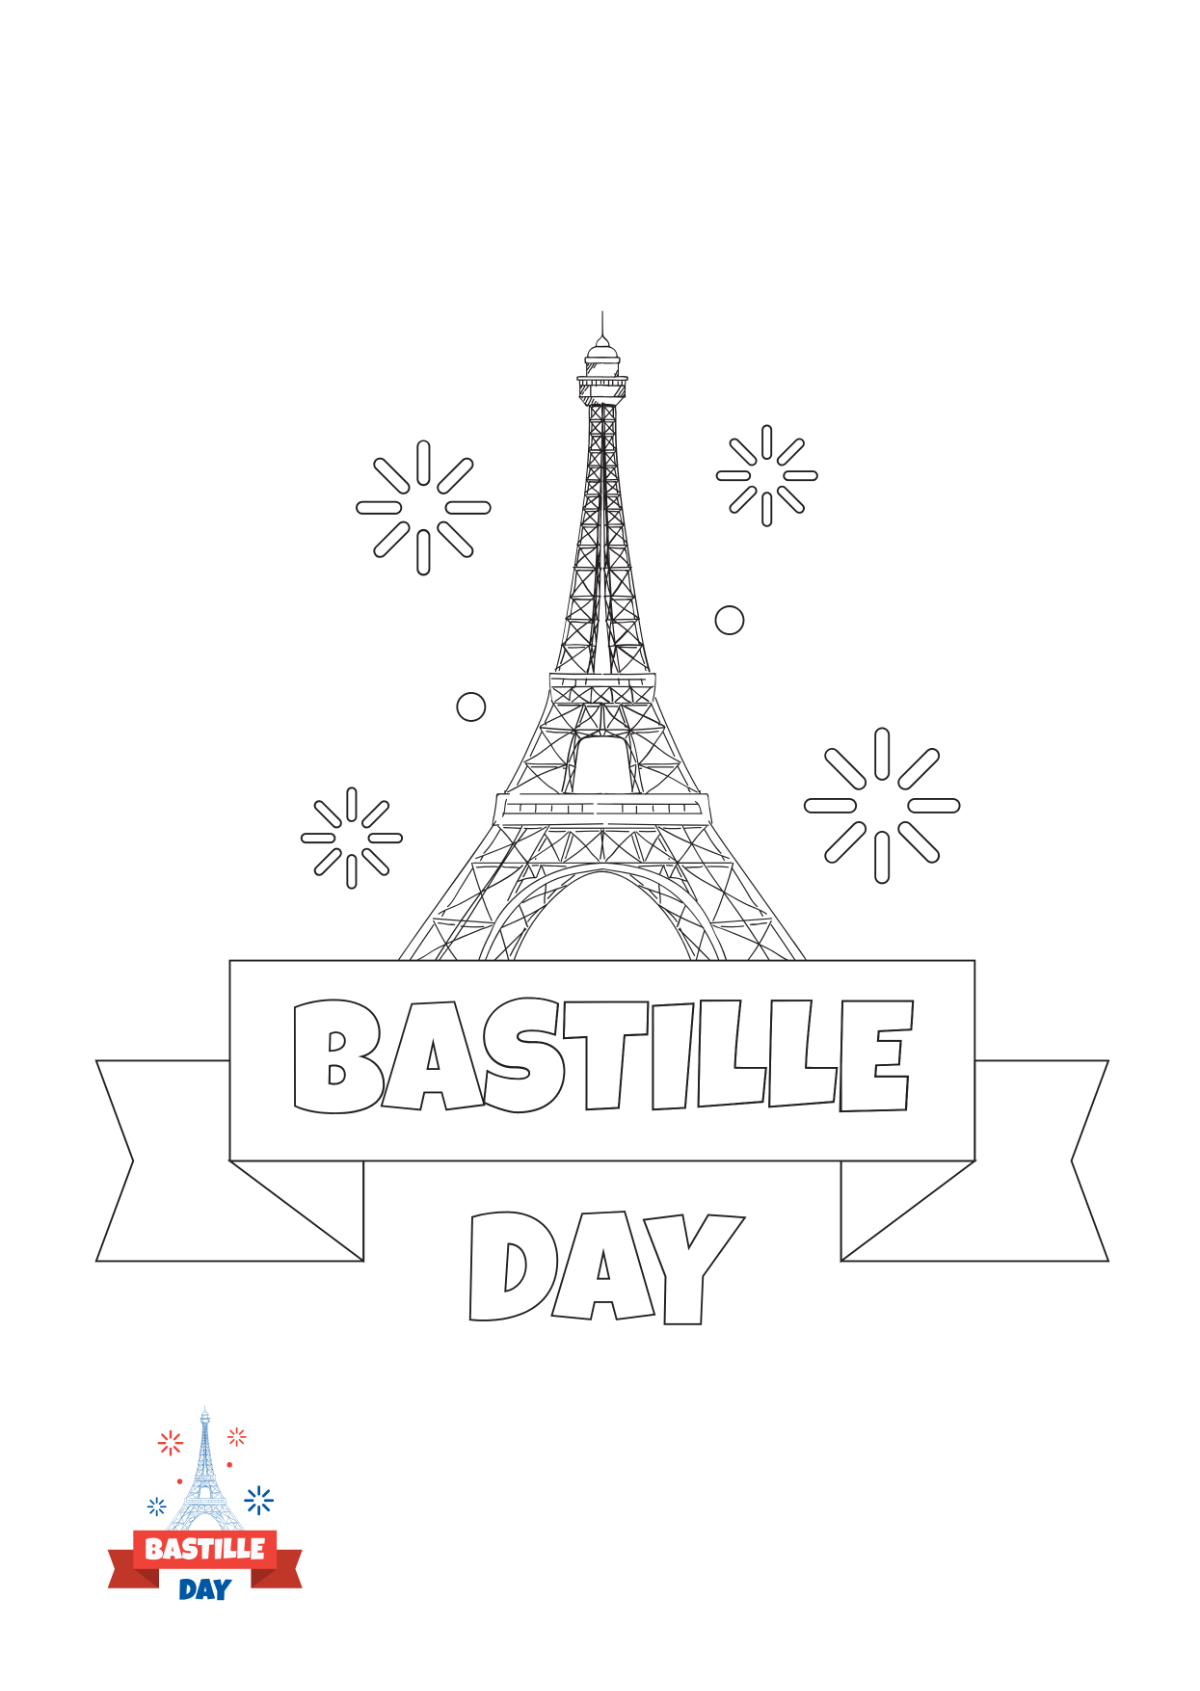 Bastille Day Coloring Page